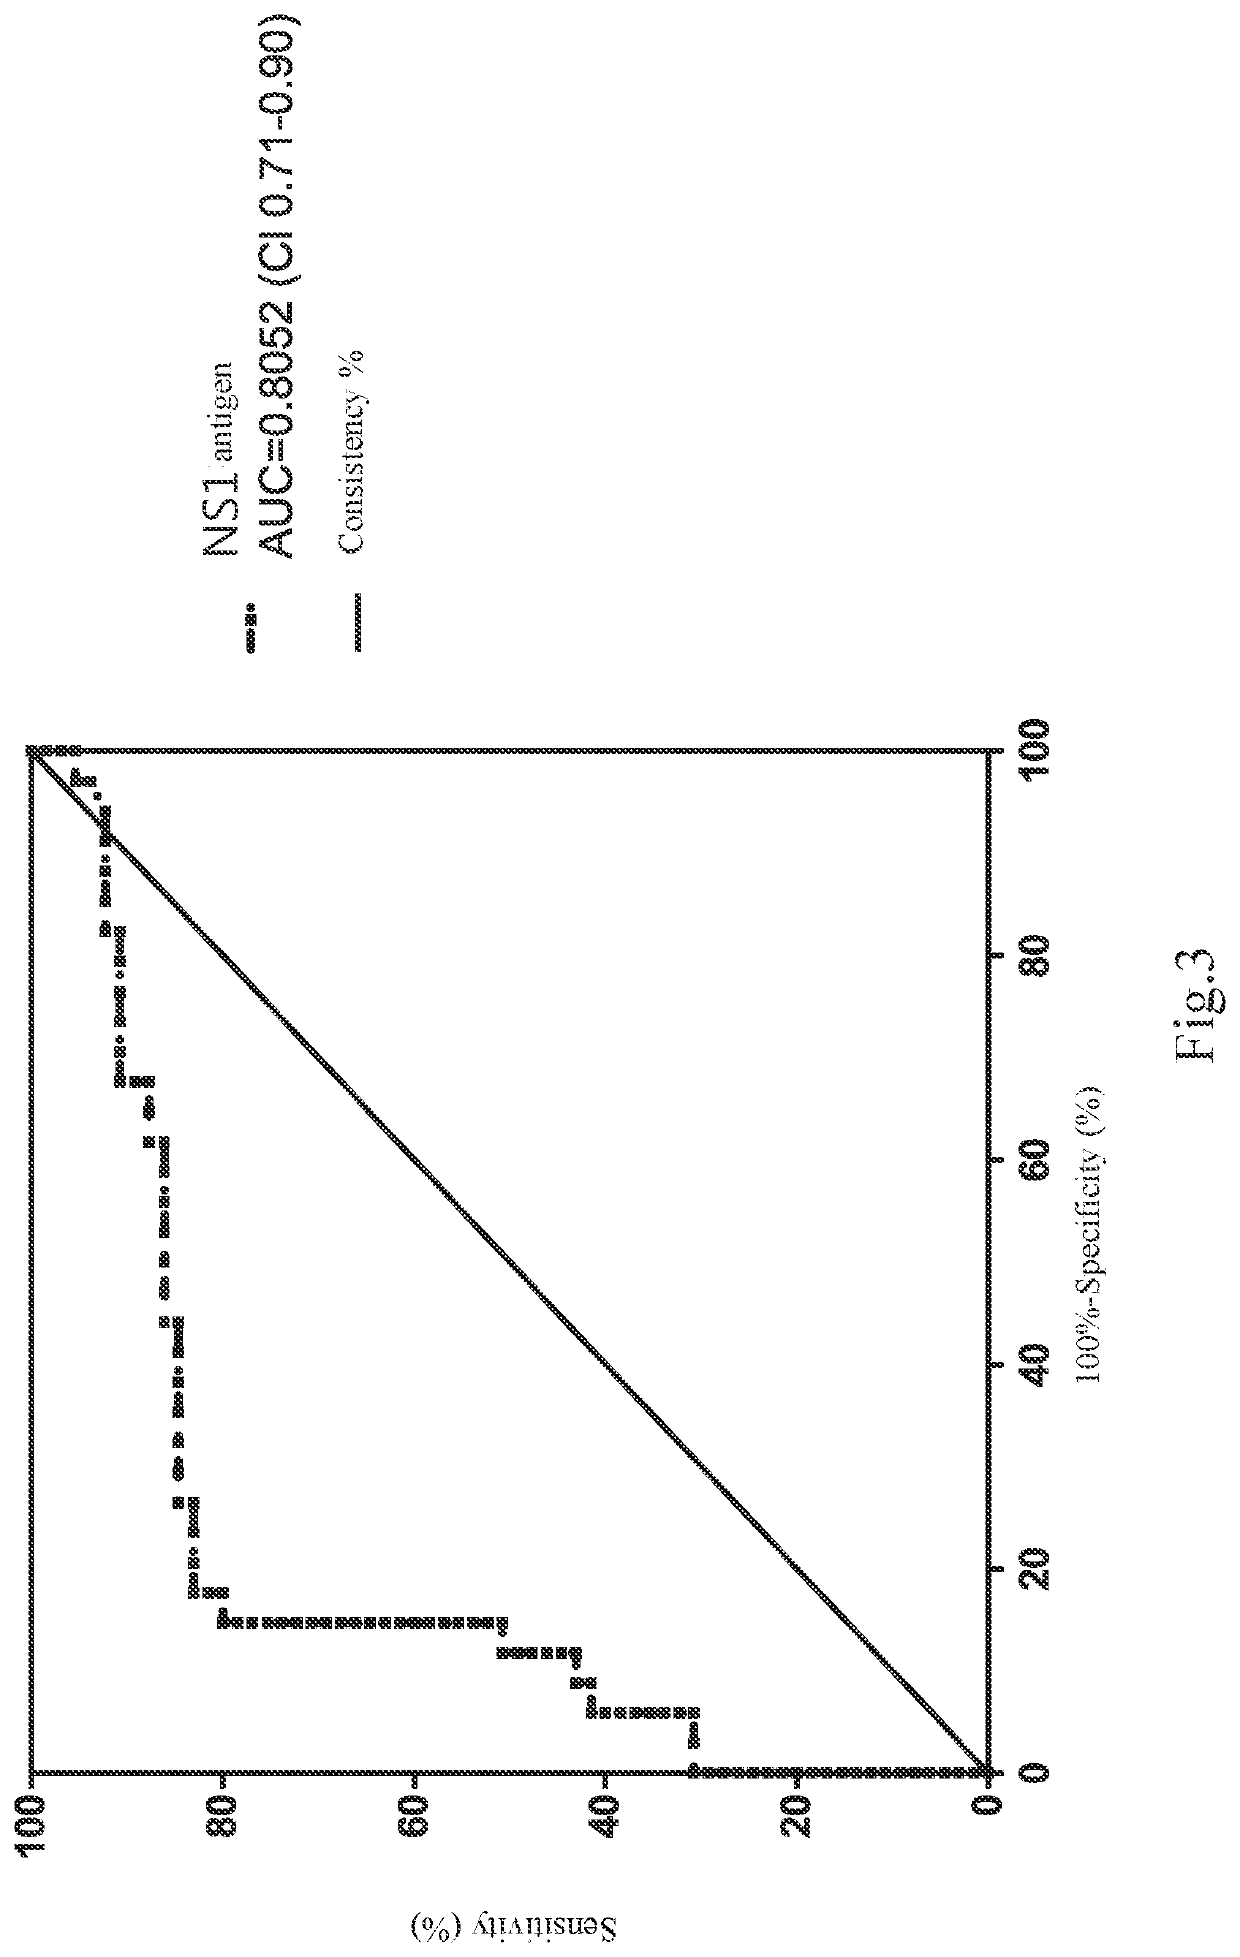 Method of elevating prediction accuracy of grouping subjects with severe dengue infection